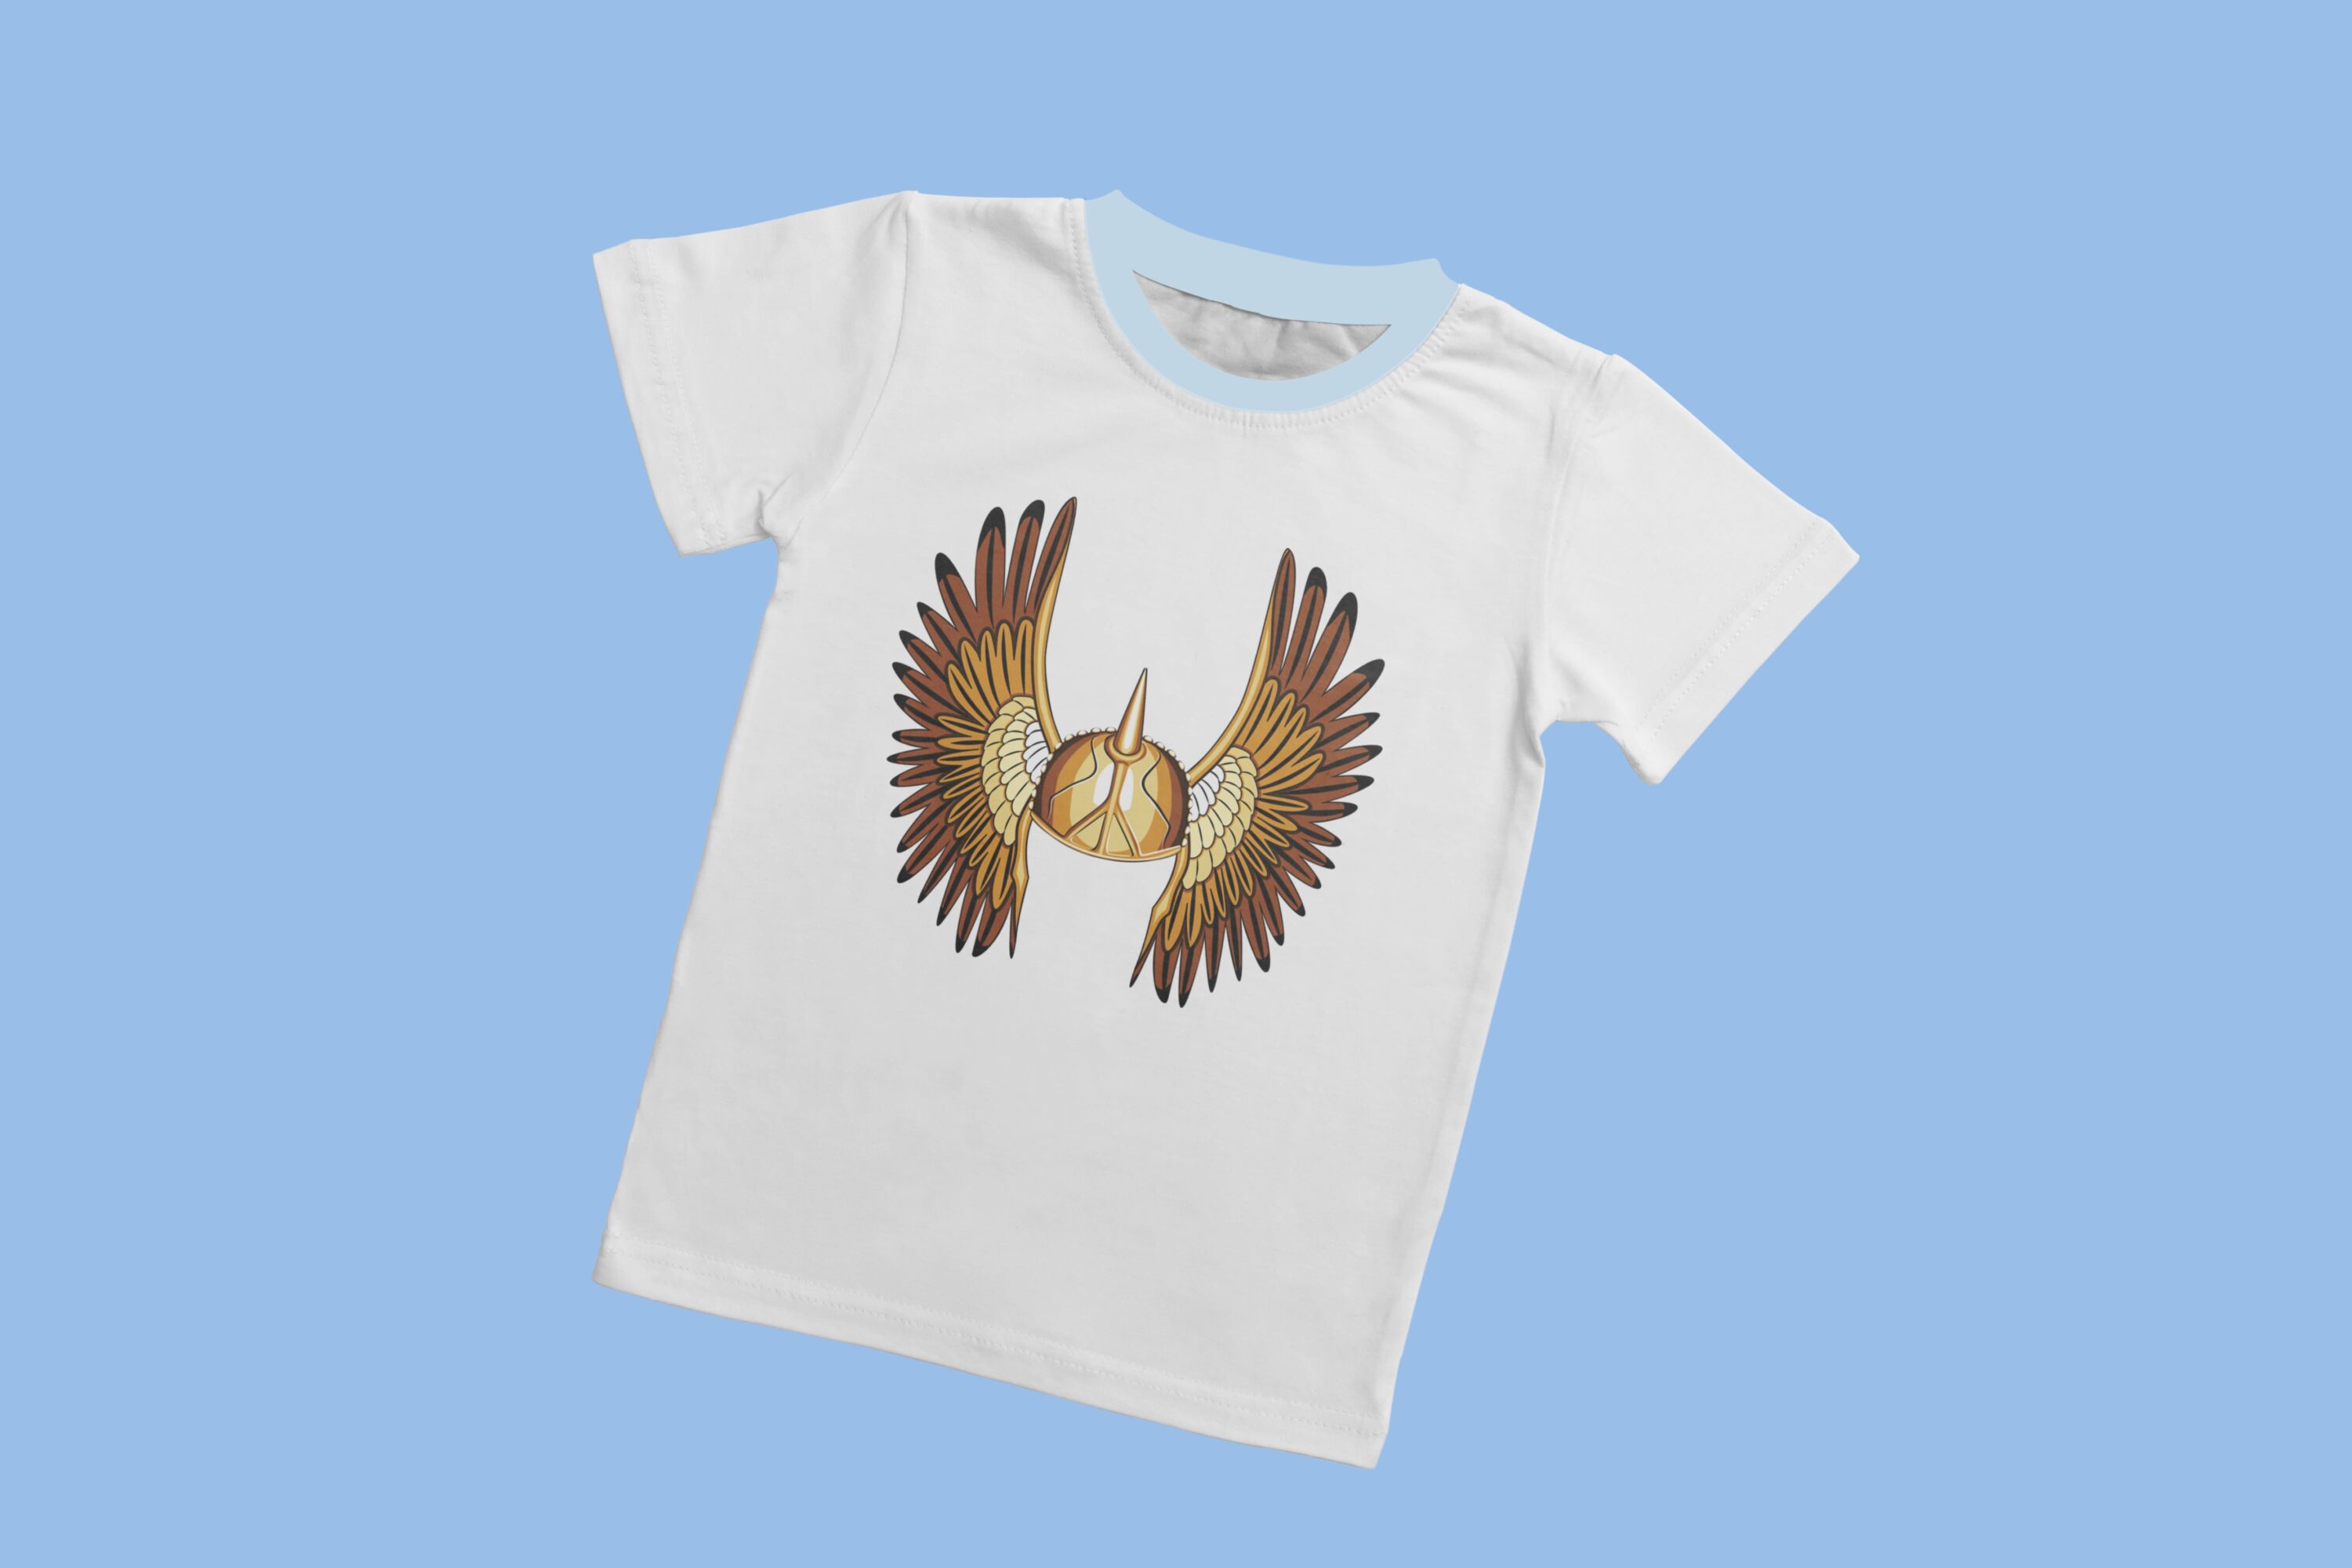 Gold viking helmet with wings on the classic white t-shirt.